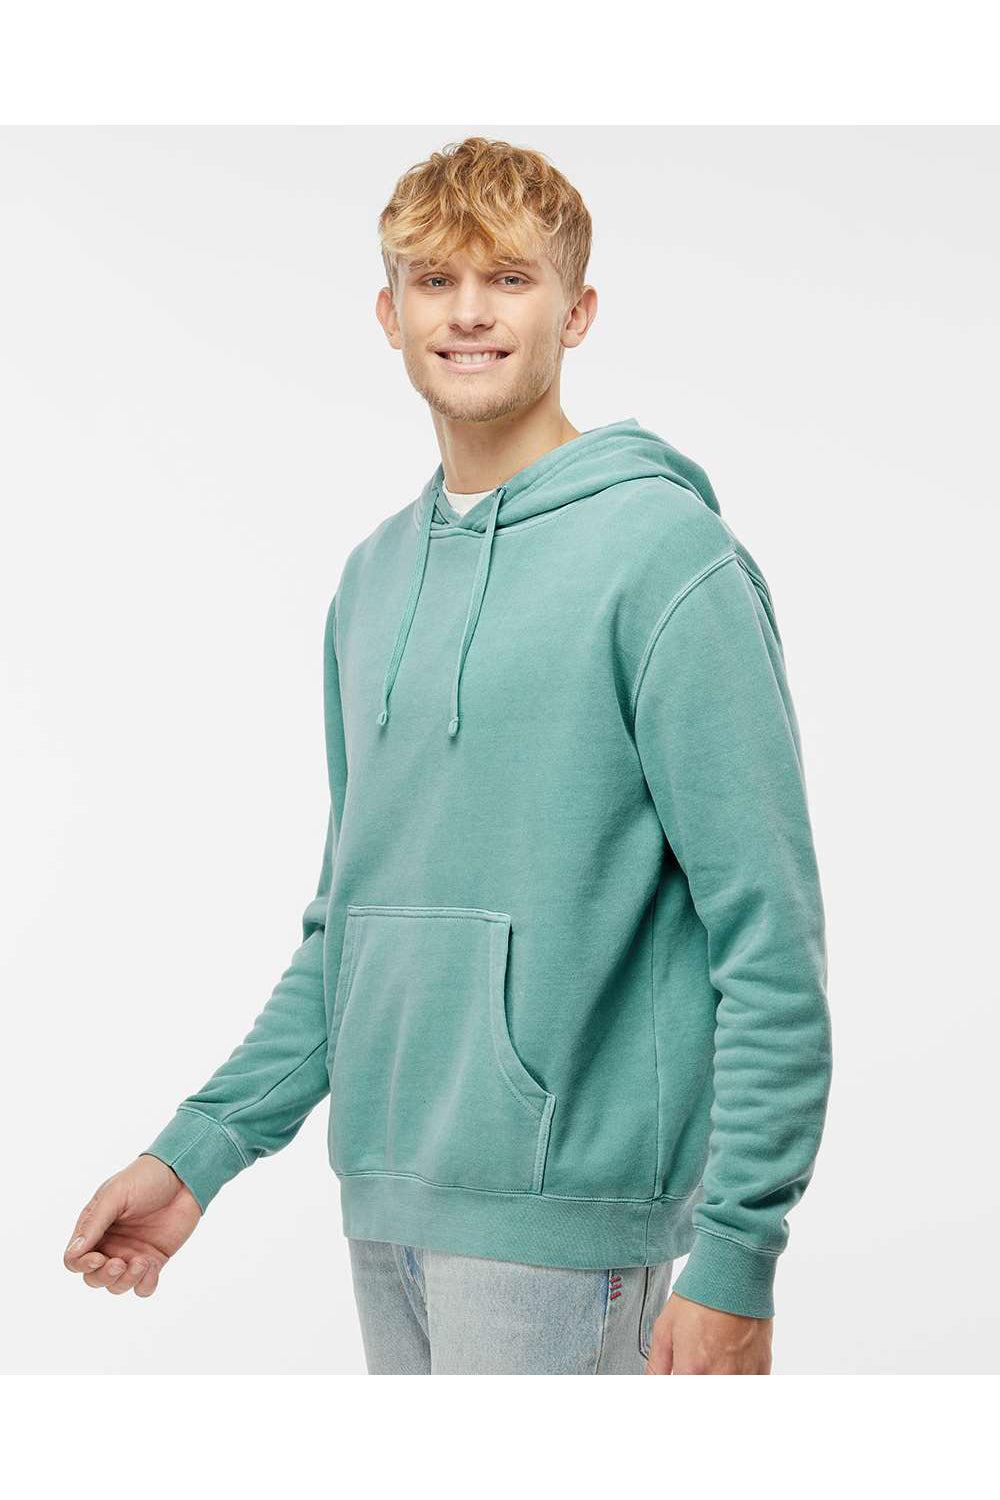 Independent Trading Co. PRM4500 Mens Pigment Dyed Hooded Sweatshirt Hoodie Mint Green Model Side